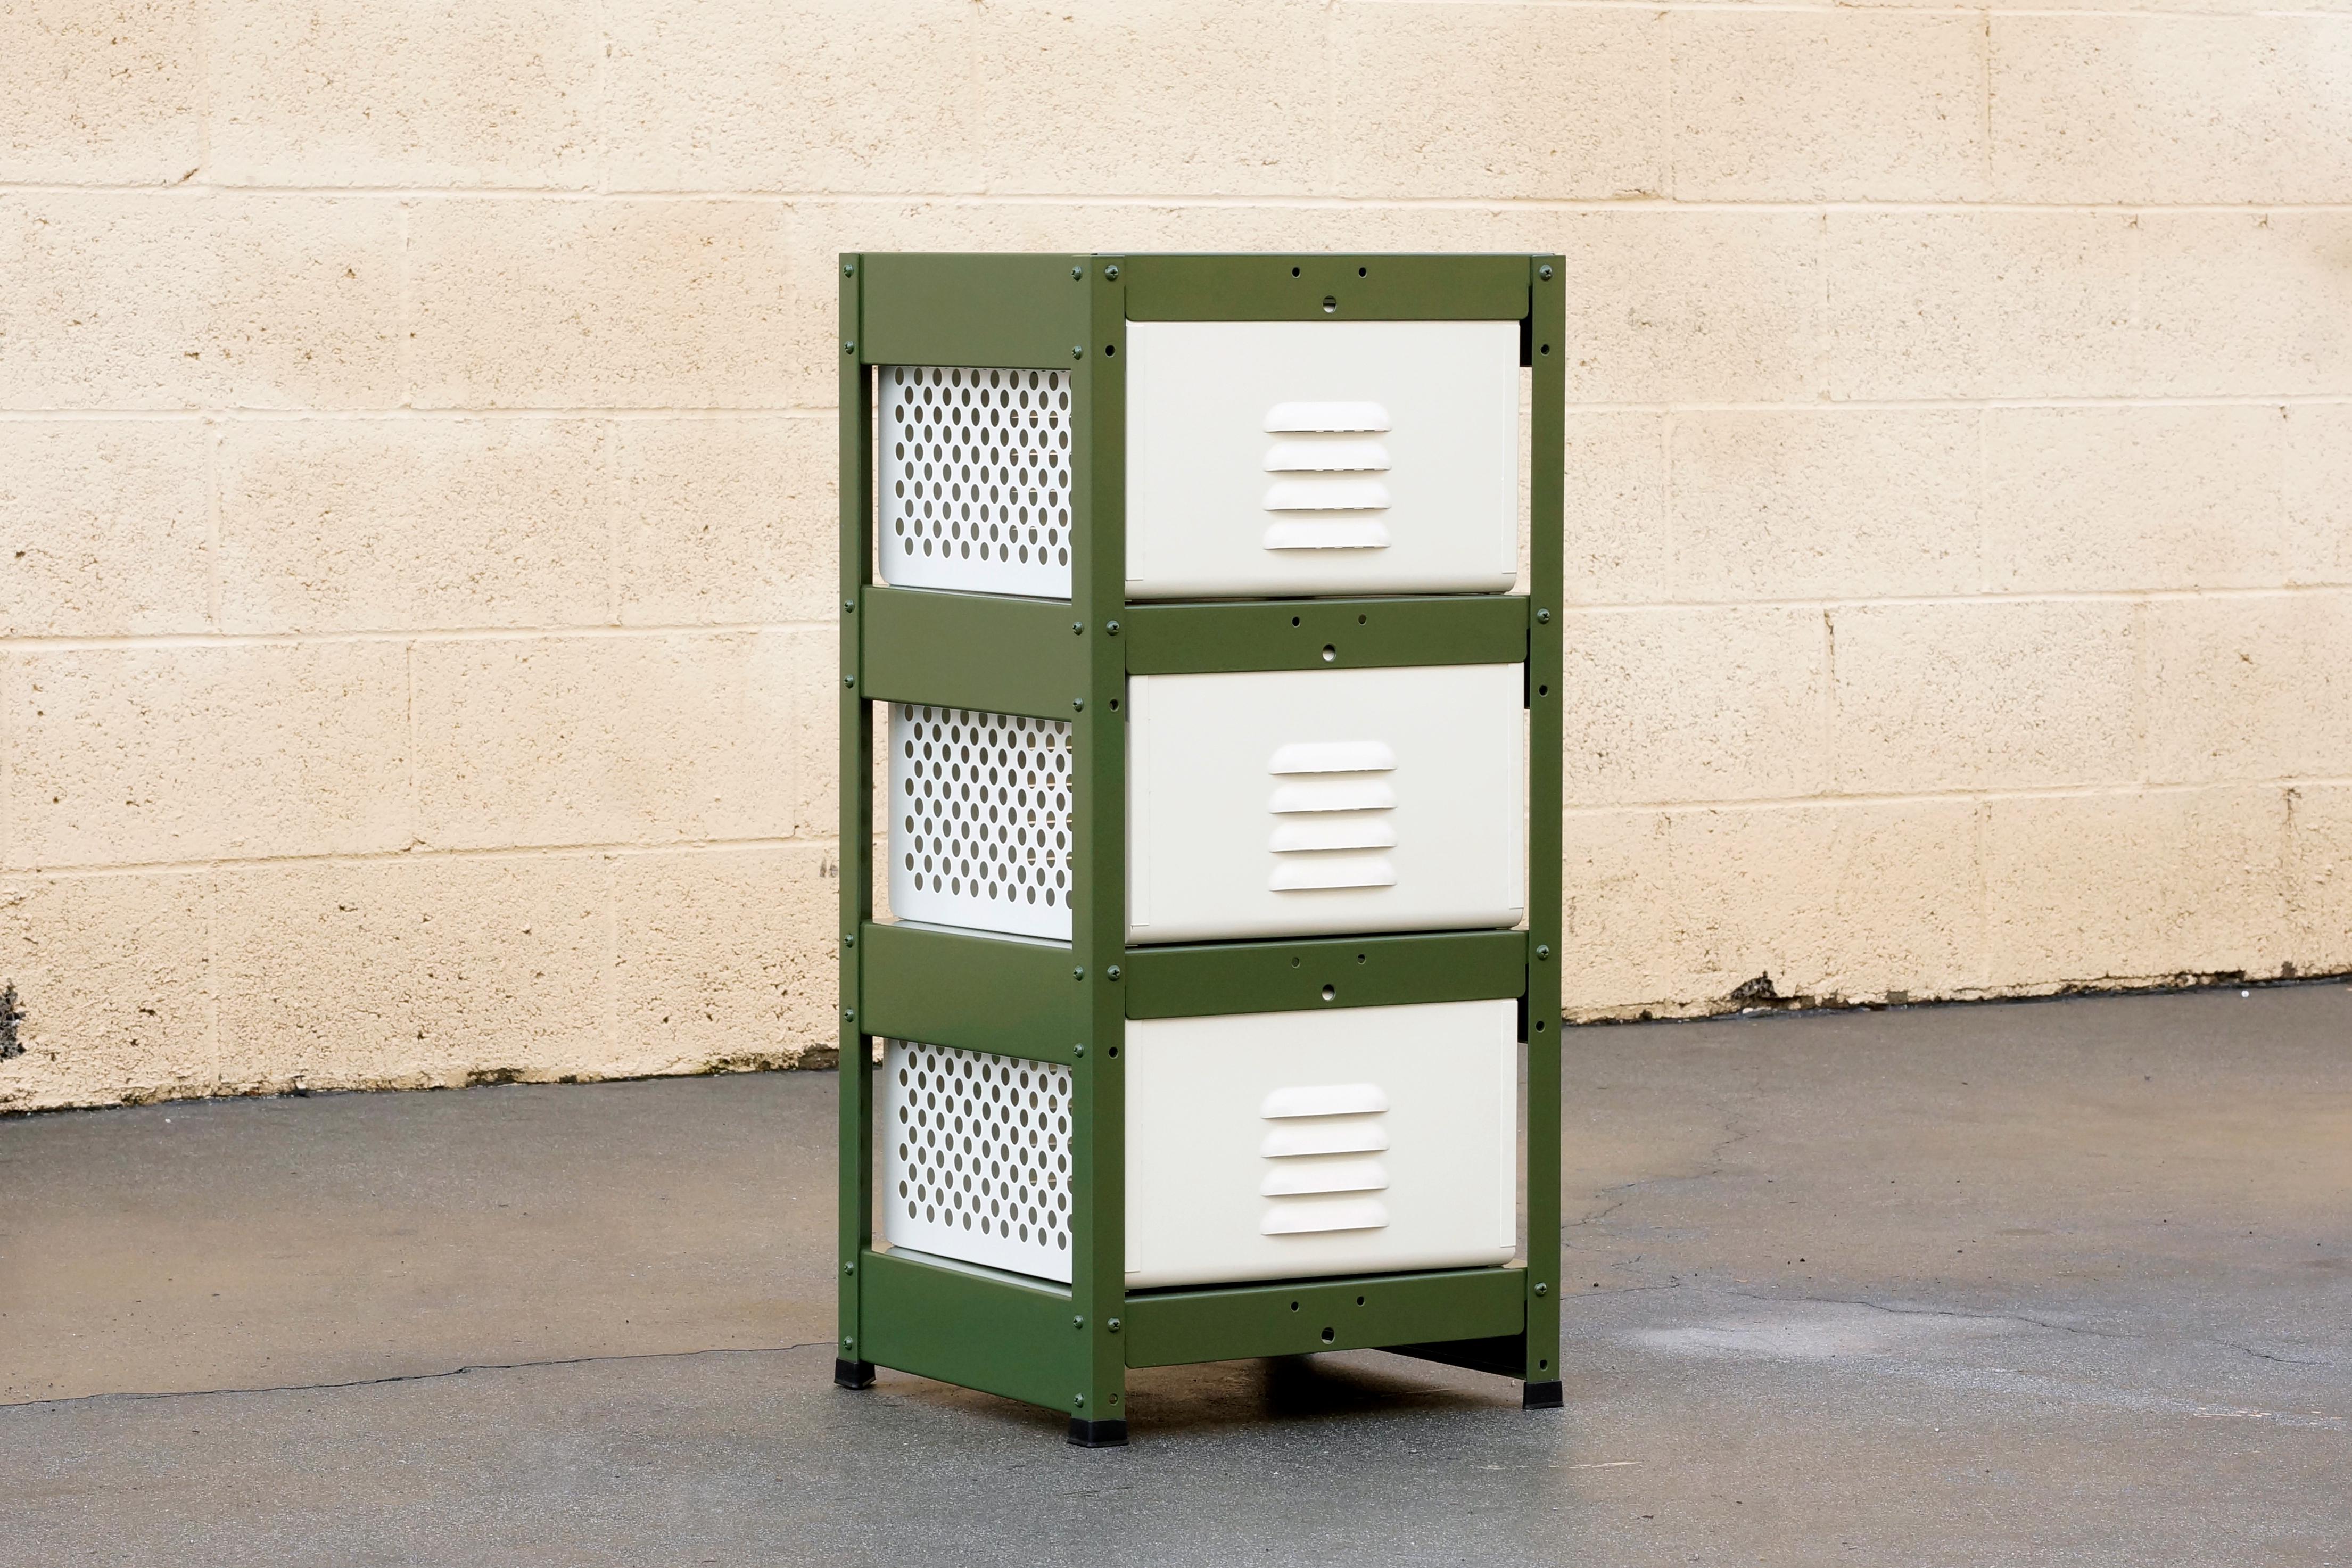 Our newly fabricated locker basket units are inspired by the mid-century classics we've been refinishing for years. Featured here is a 1 x 3 unit with pearl baskets and an army green frame. It's the perfect storage solution for anything from tools,